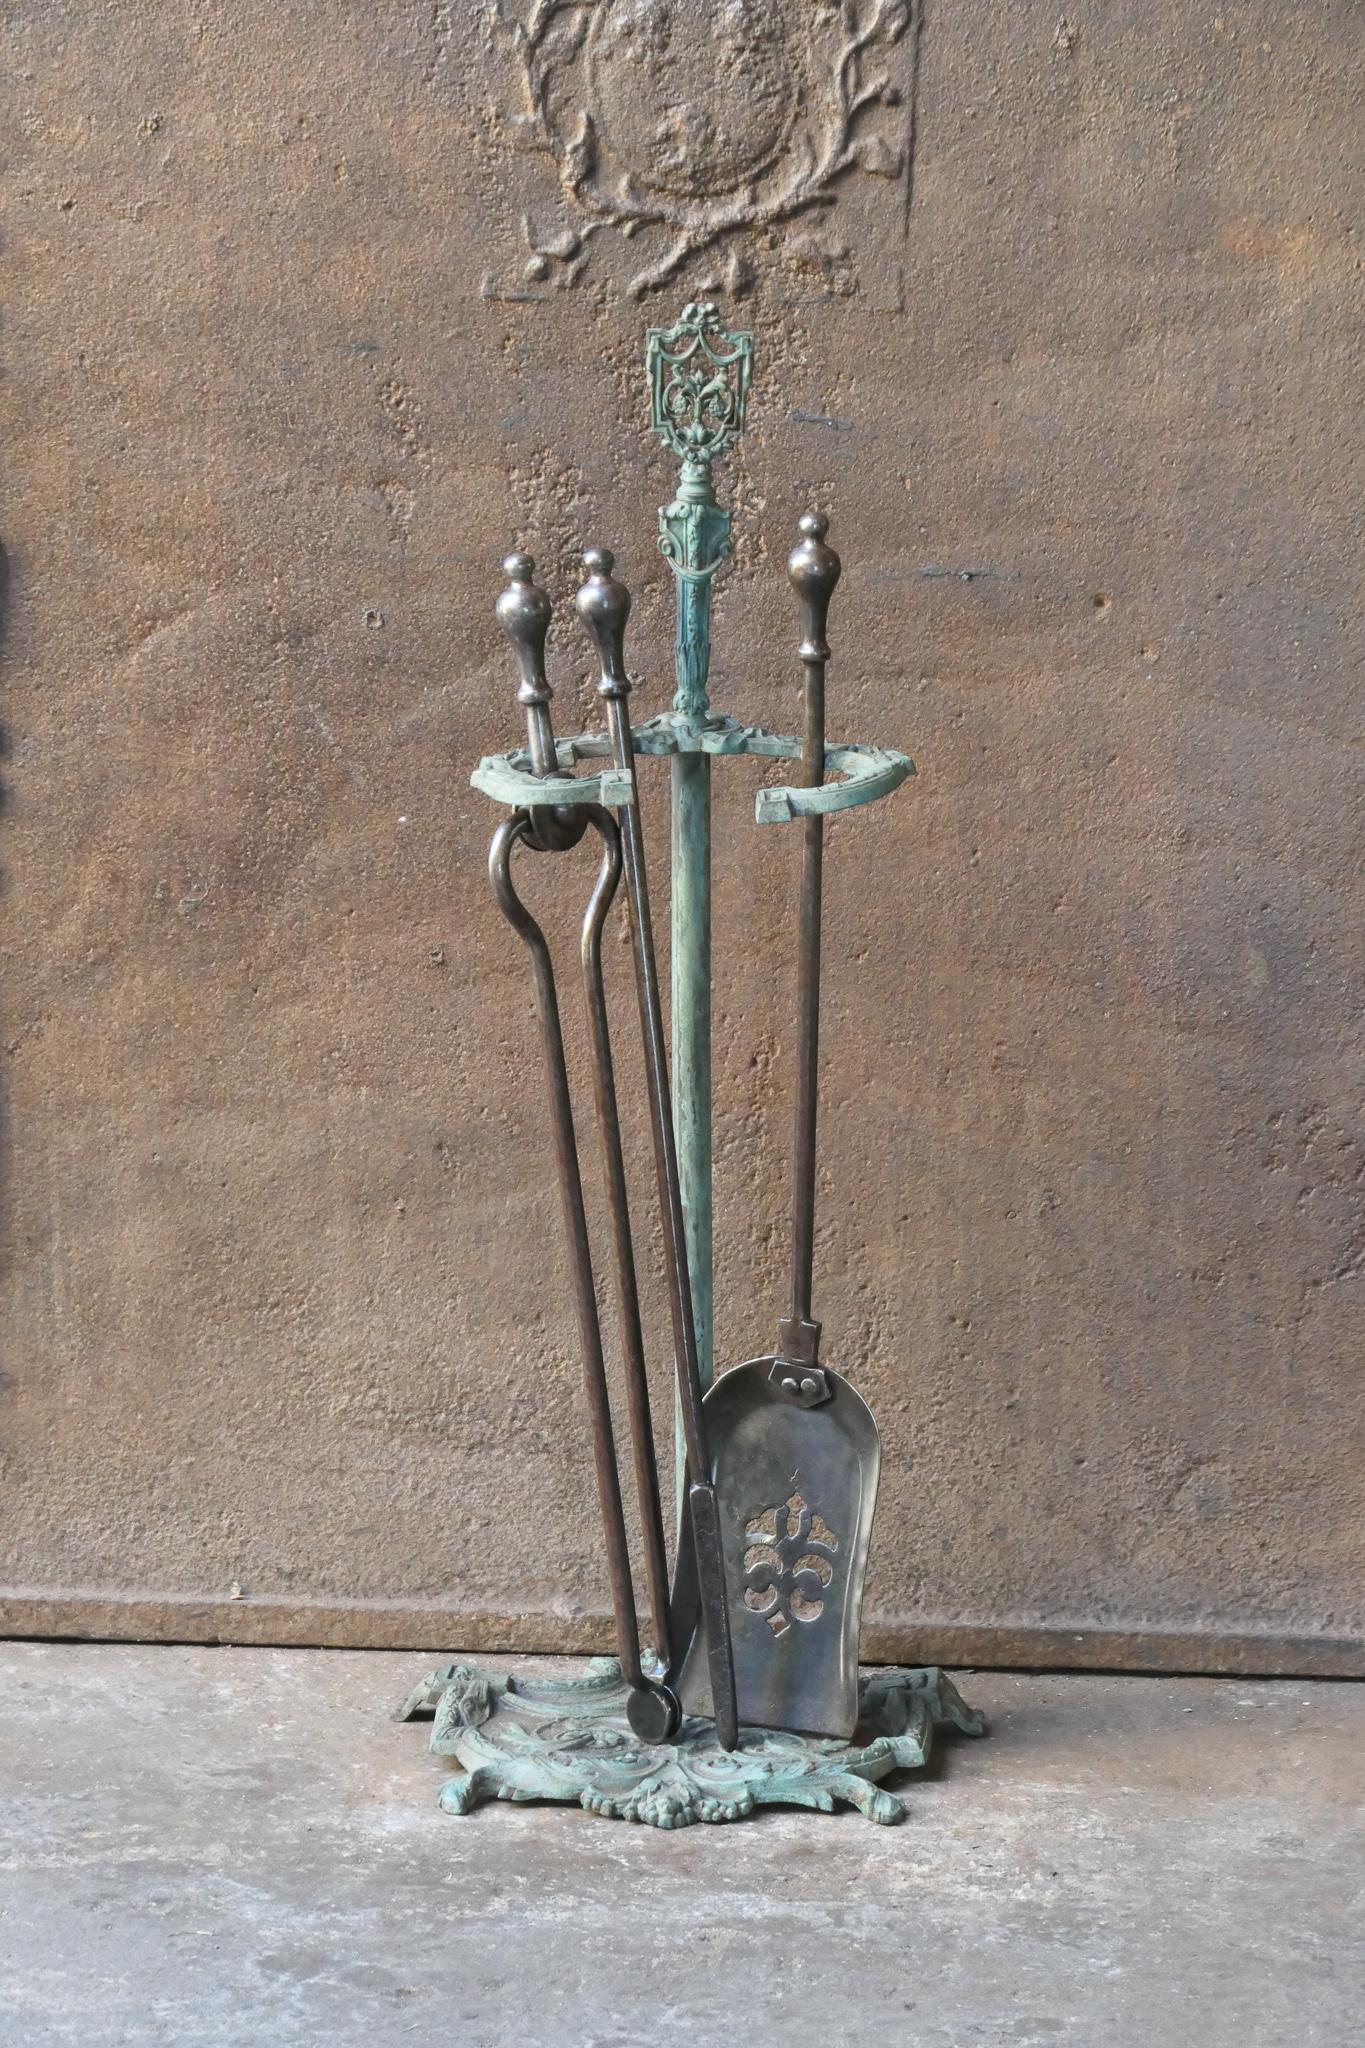 English set of three fireplace tools and a stand, made of wrought iron and brass. The fire tool set is in a good condition and is fully functional. 19th century, Victorian.